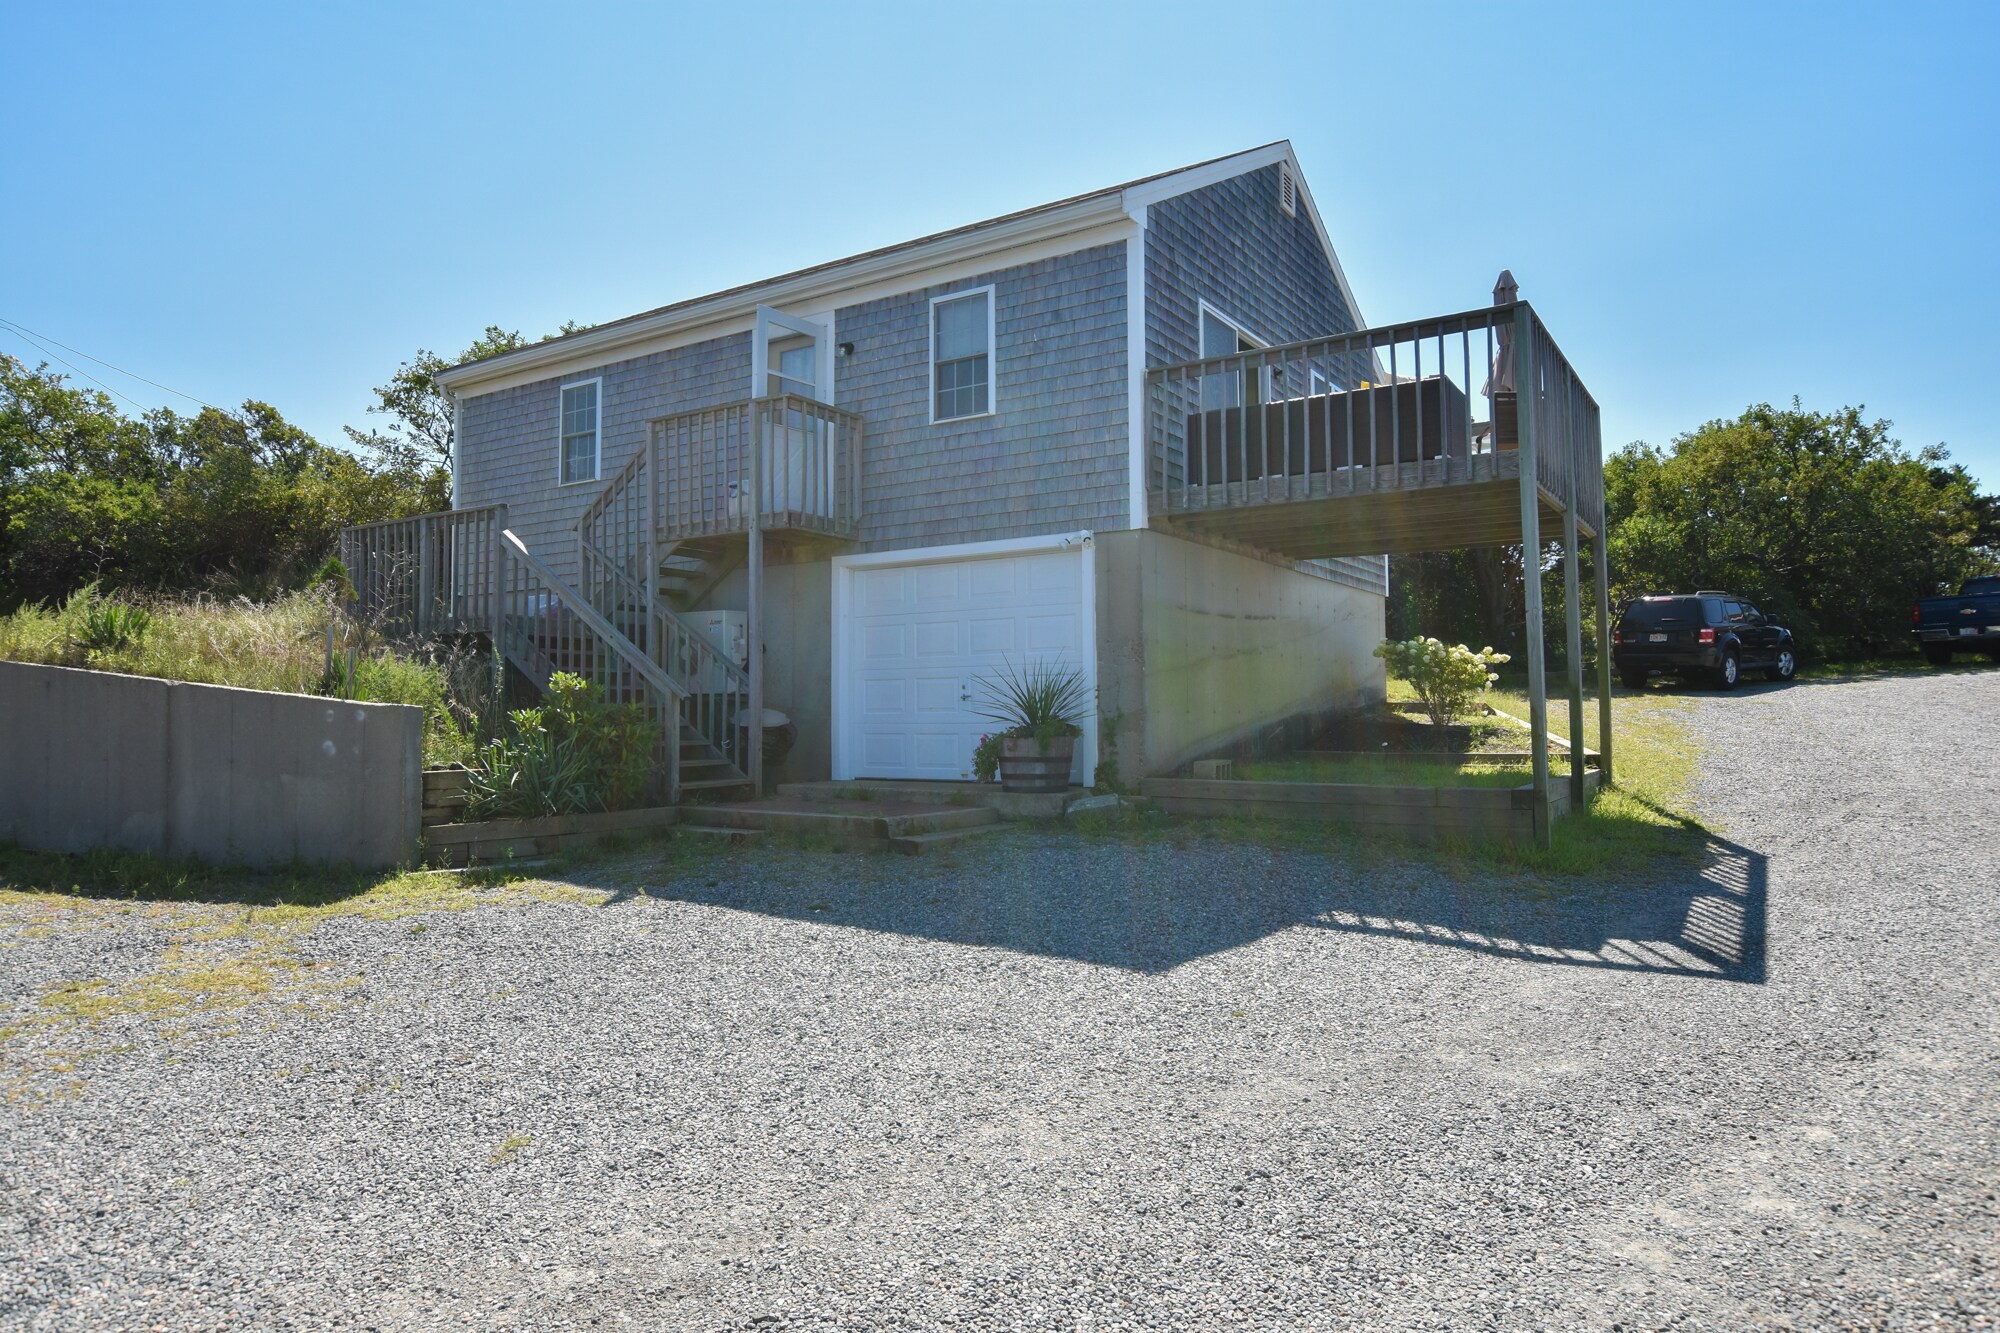 Property Image 2 - 12215: Beautiful Views of Cape Cod Bay, Access to Private Beach, Near Shuttle Route to P-Town!